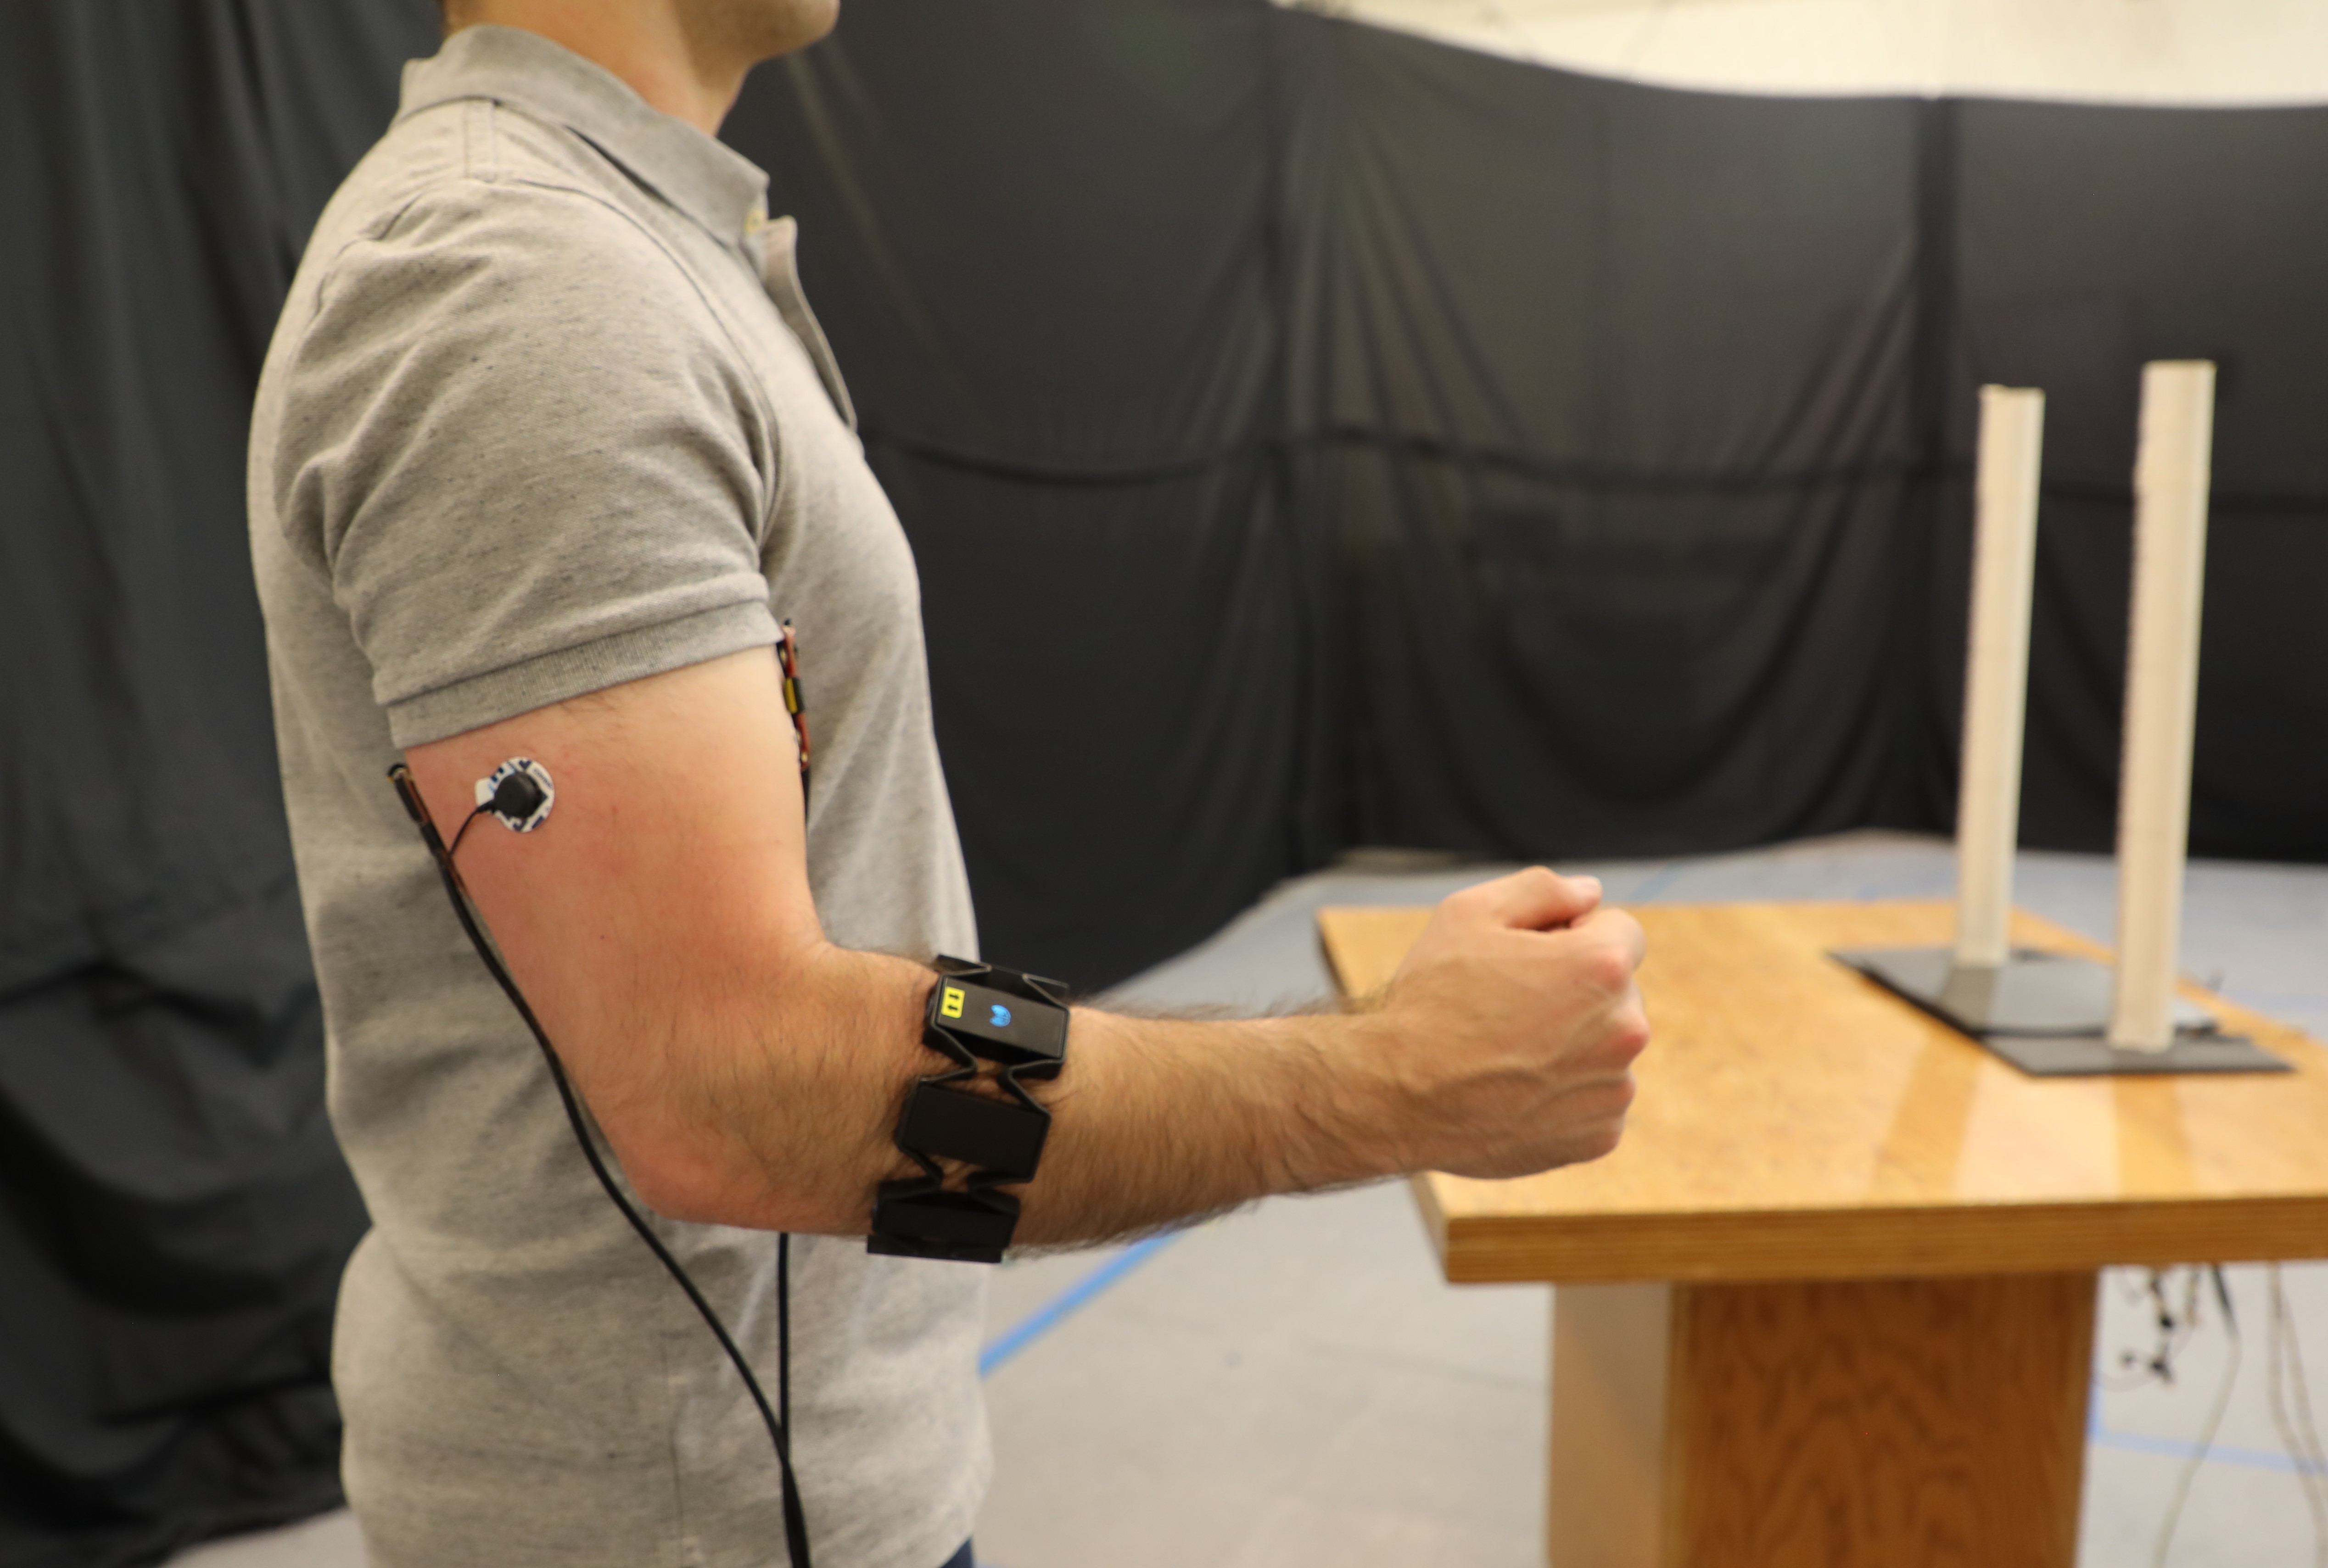 EMG sensors monitor biceps, triceps, and forearm muscles.  The forearm device also includes an IMU.